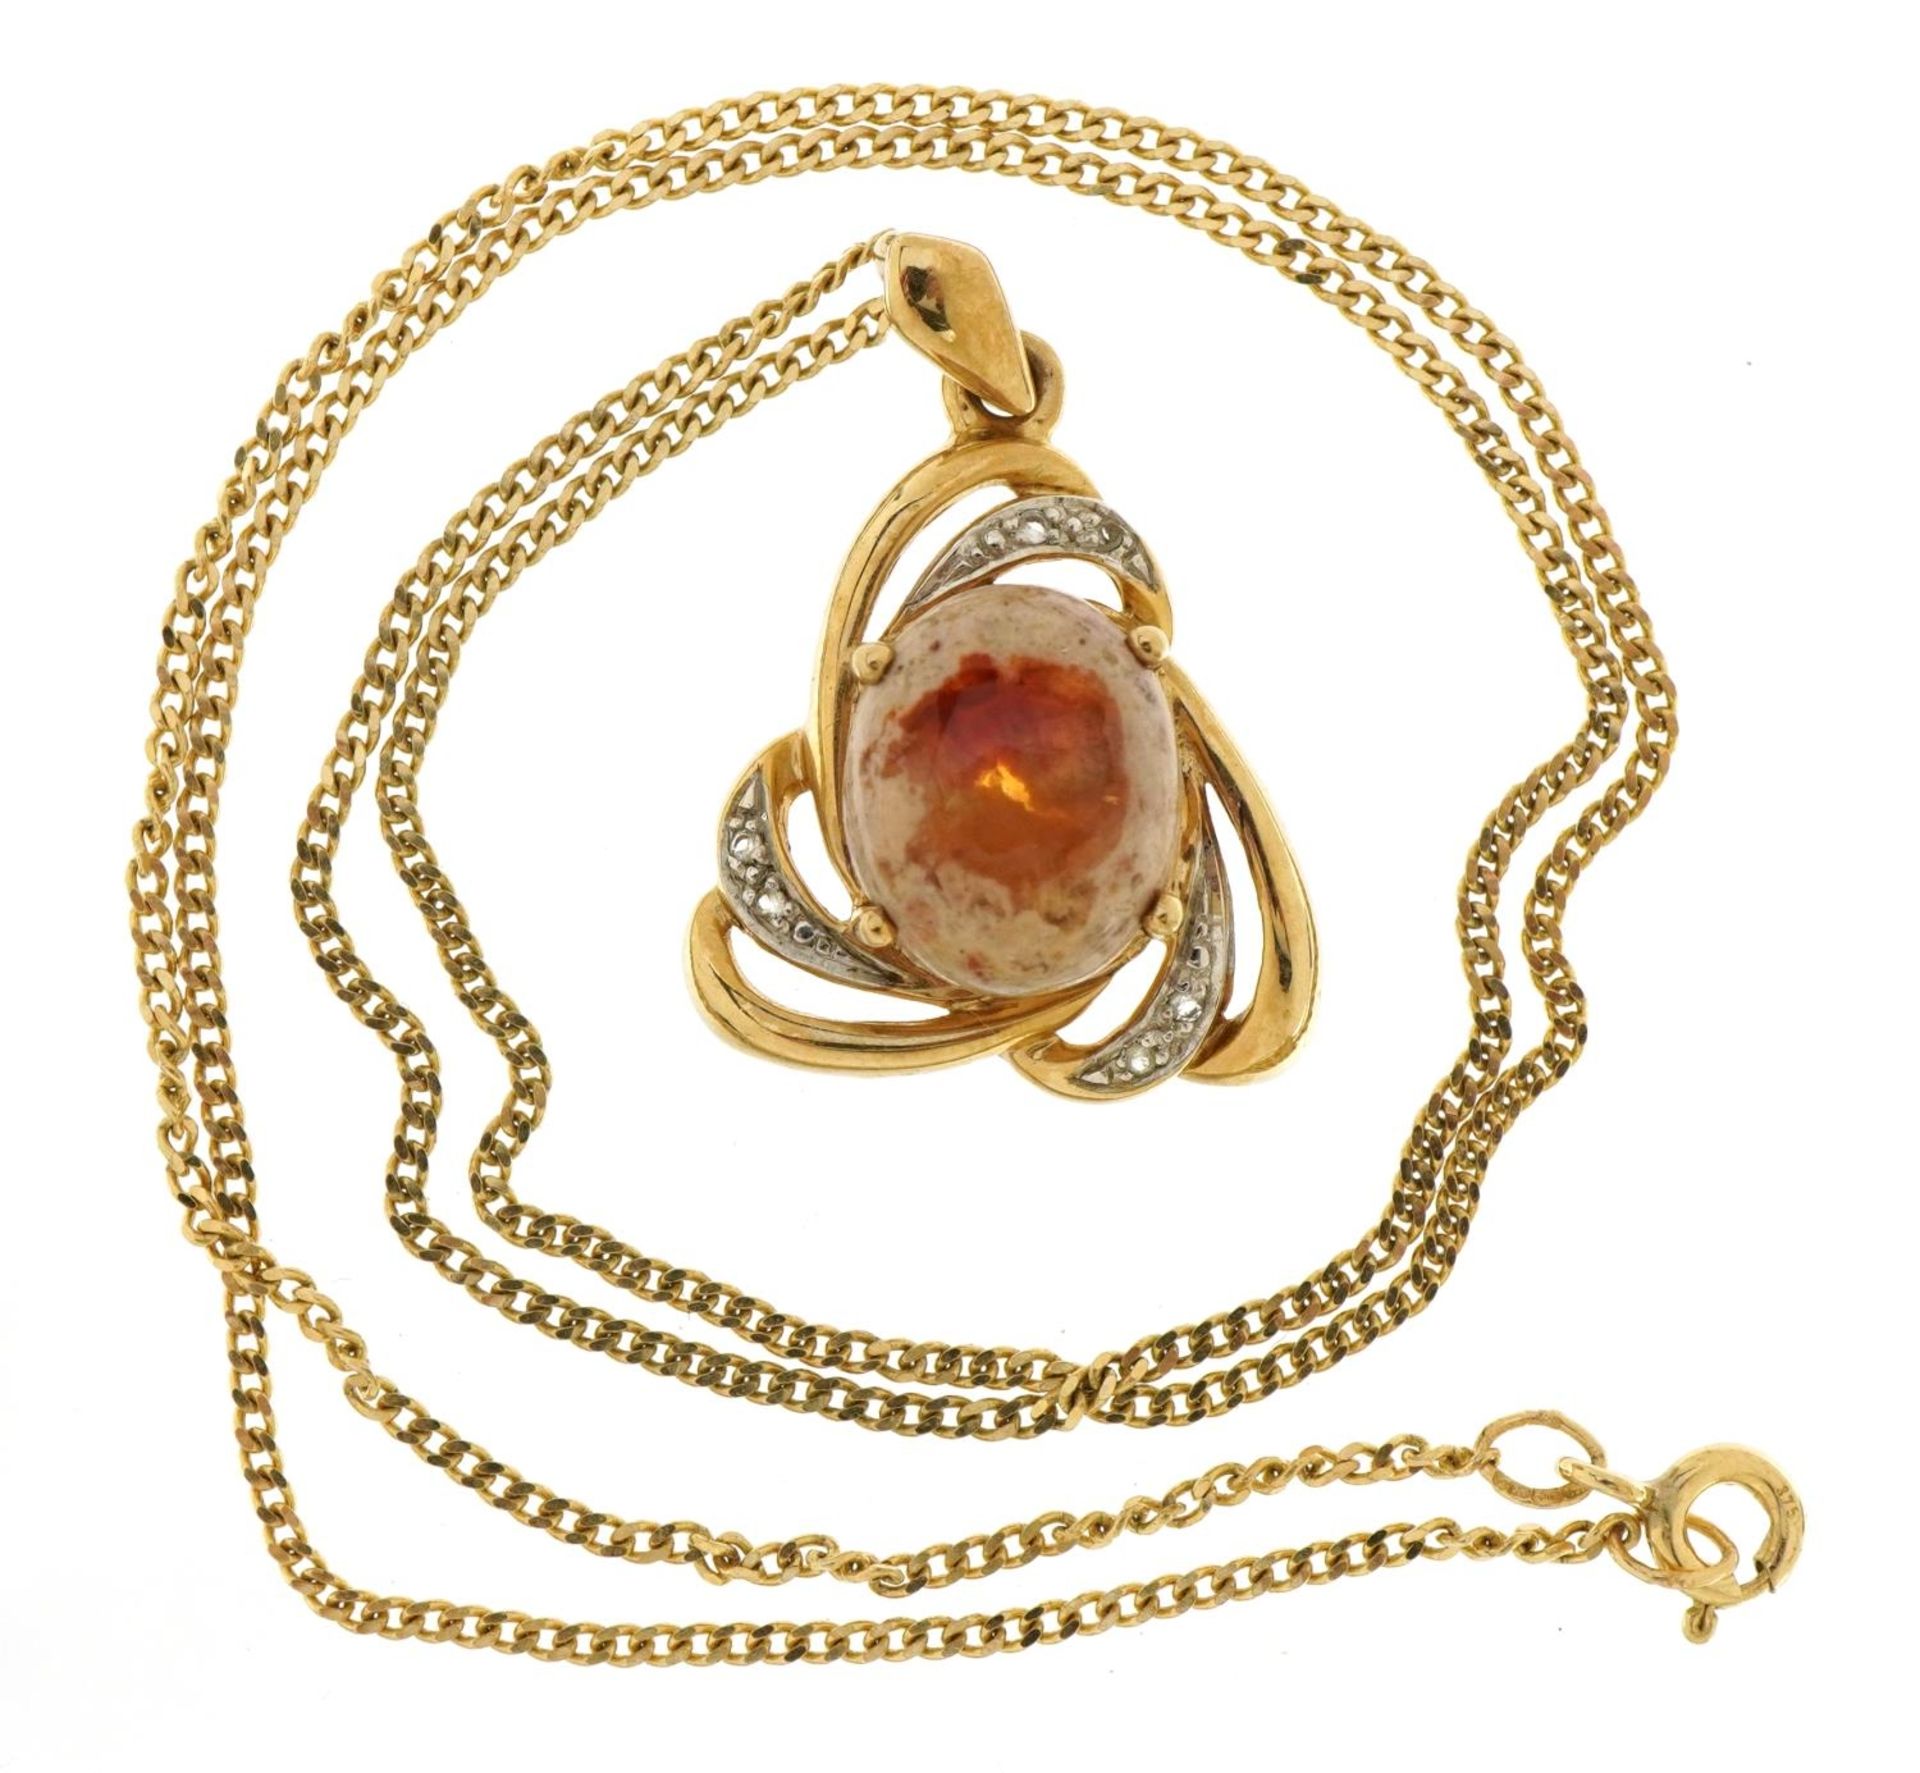 9ct two tone gold cabochon orange stone pendant set with clear stones on a 9ct gold curb link - Bild 2 aus 4